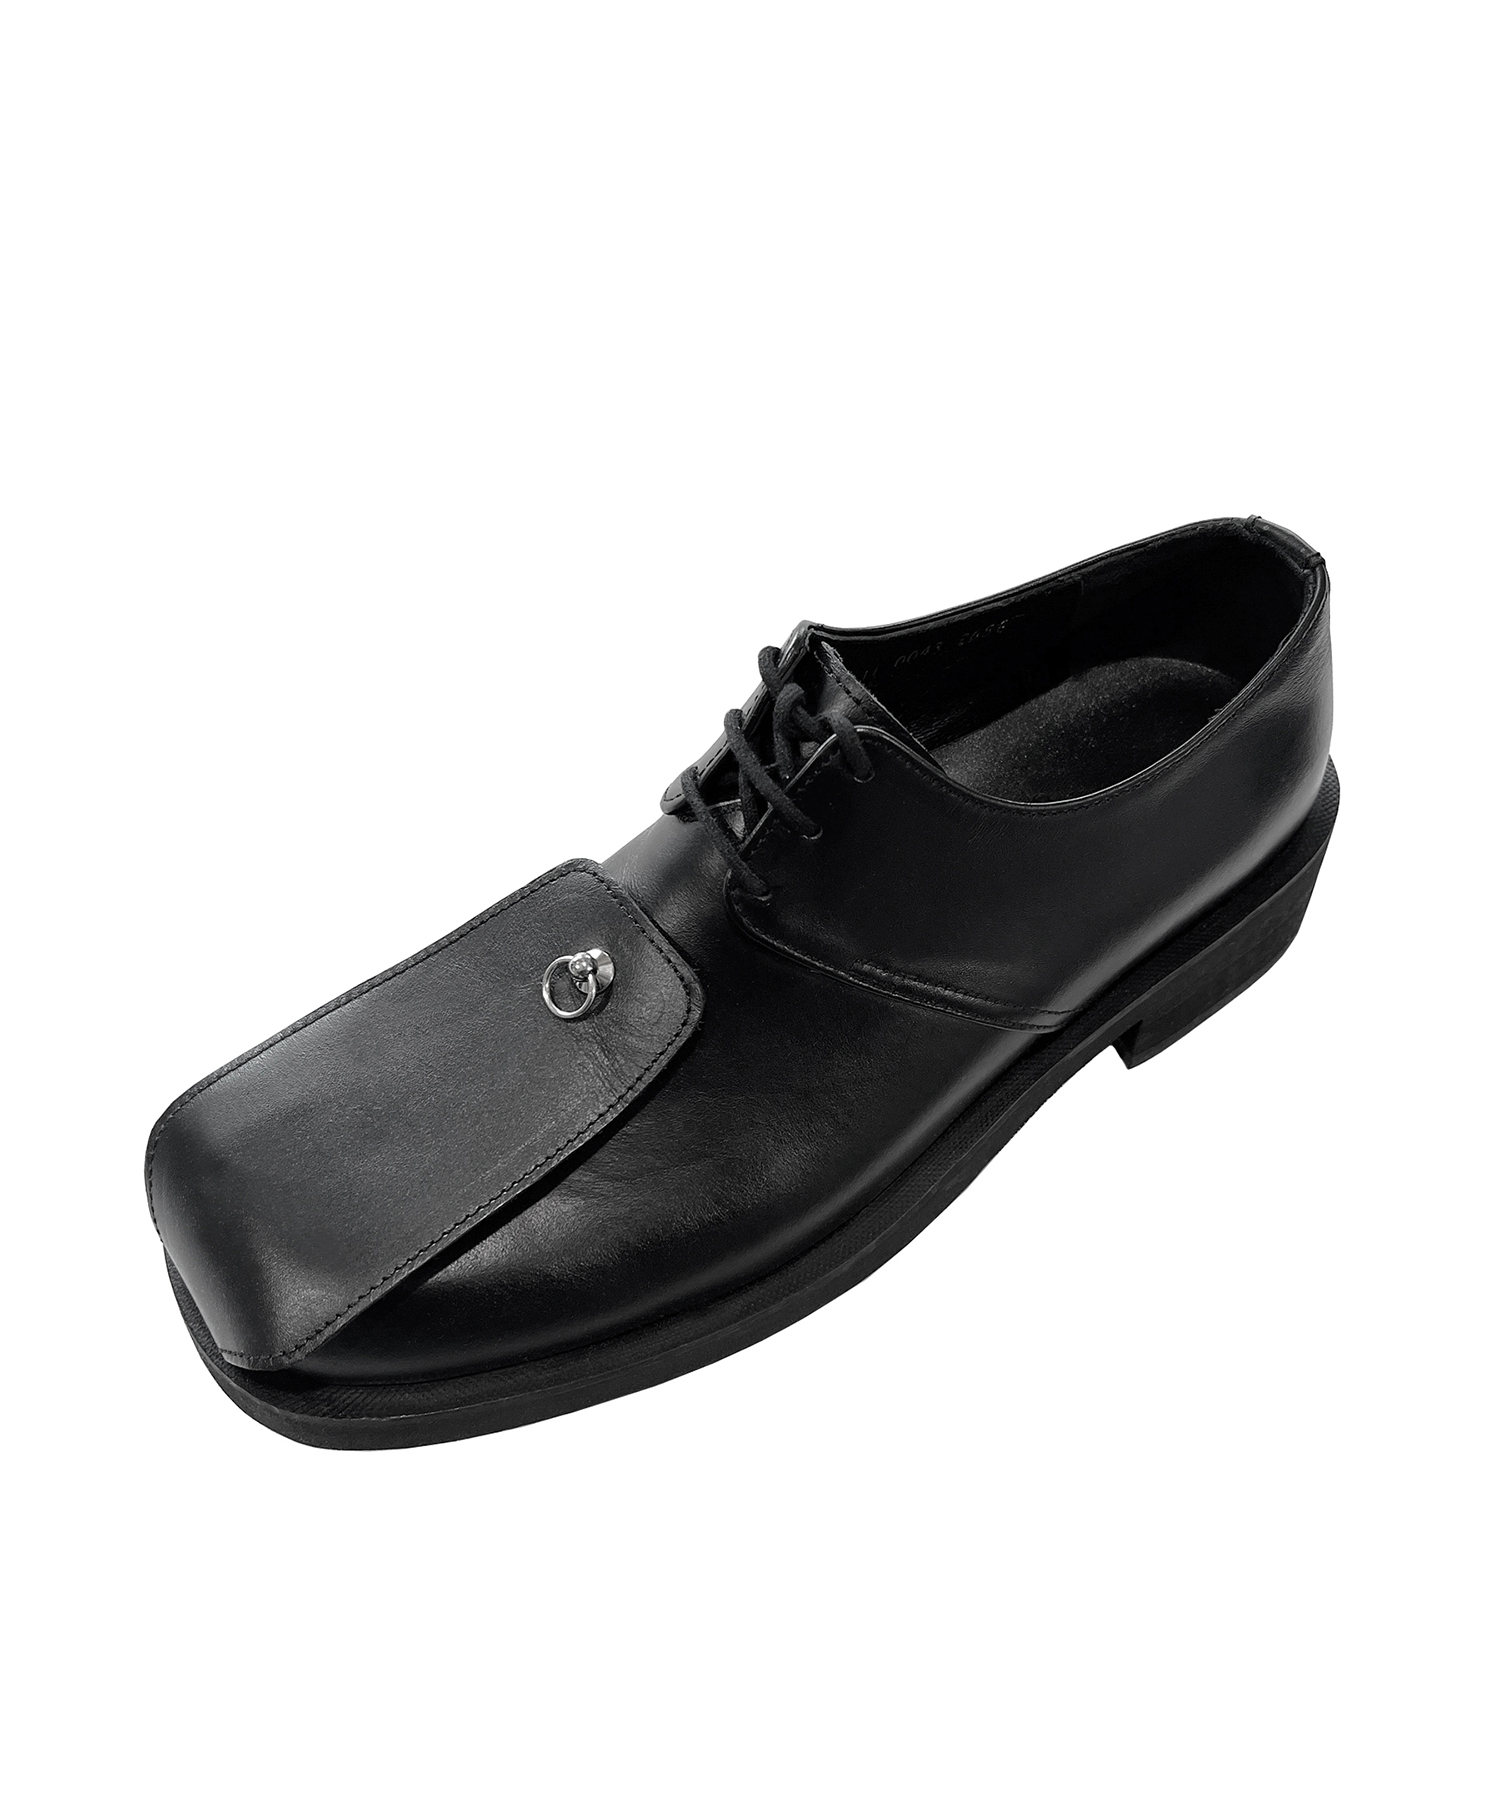 LMMM TOE COVER 3HOLE DERBY BLACK